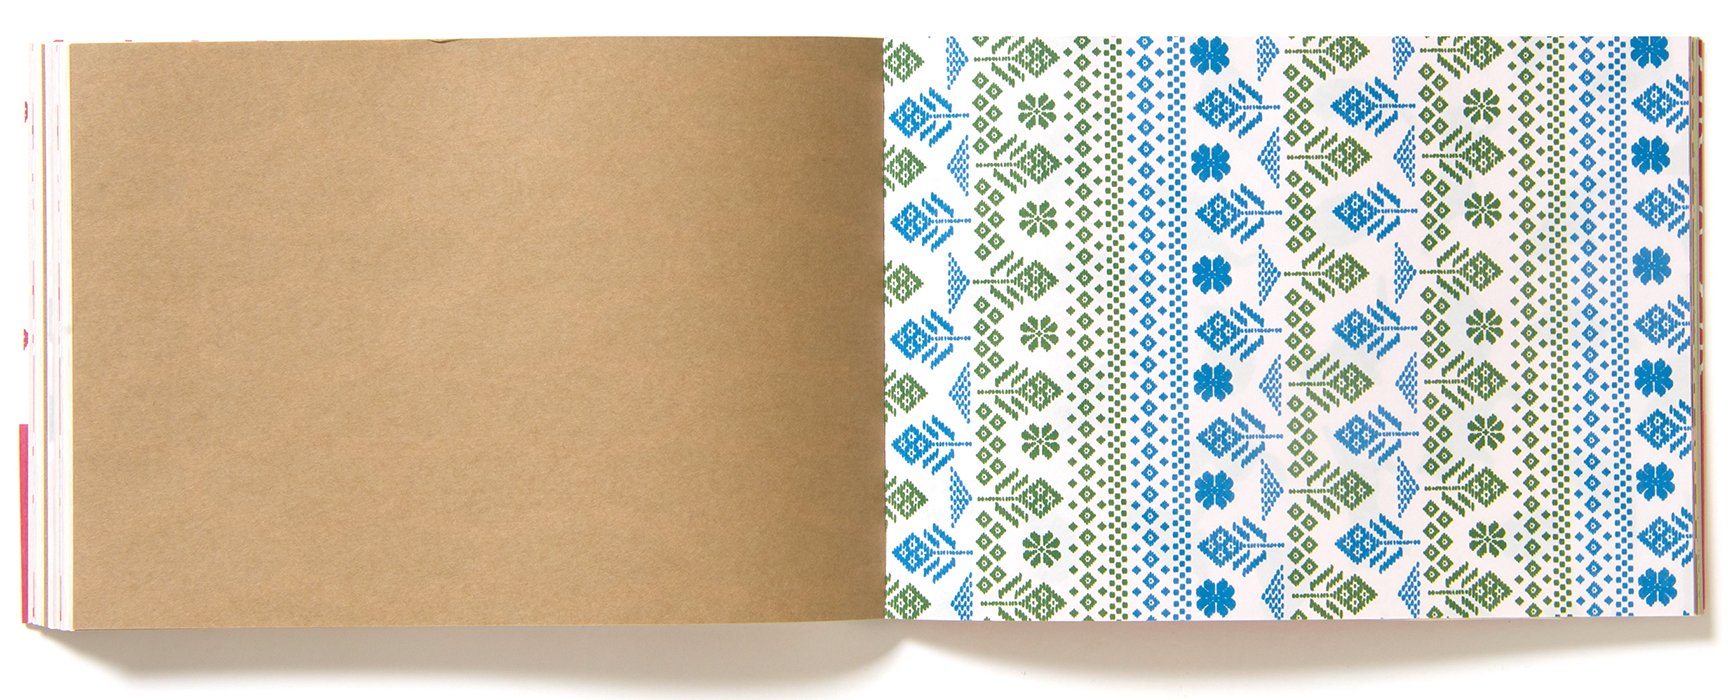 100 Papers with Japanese Patterns | 